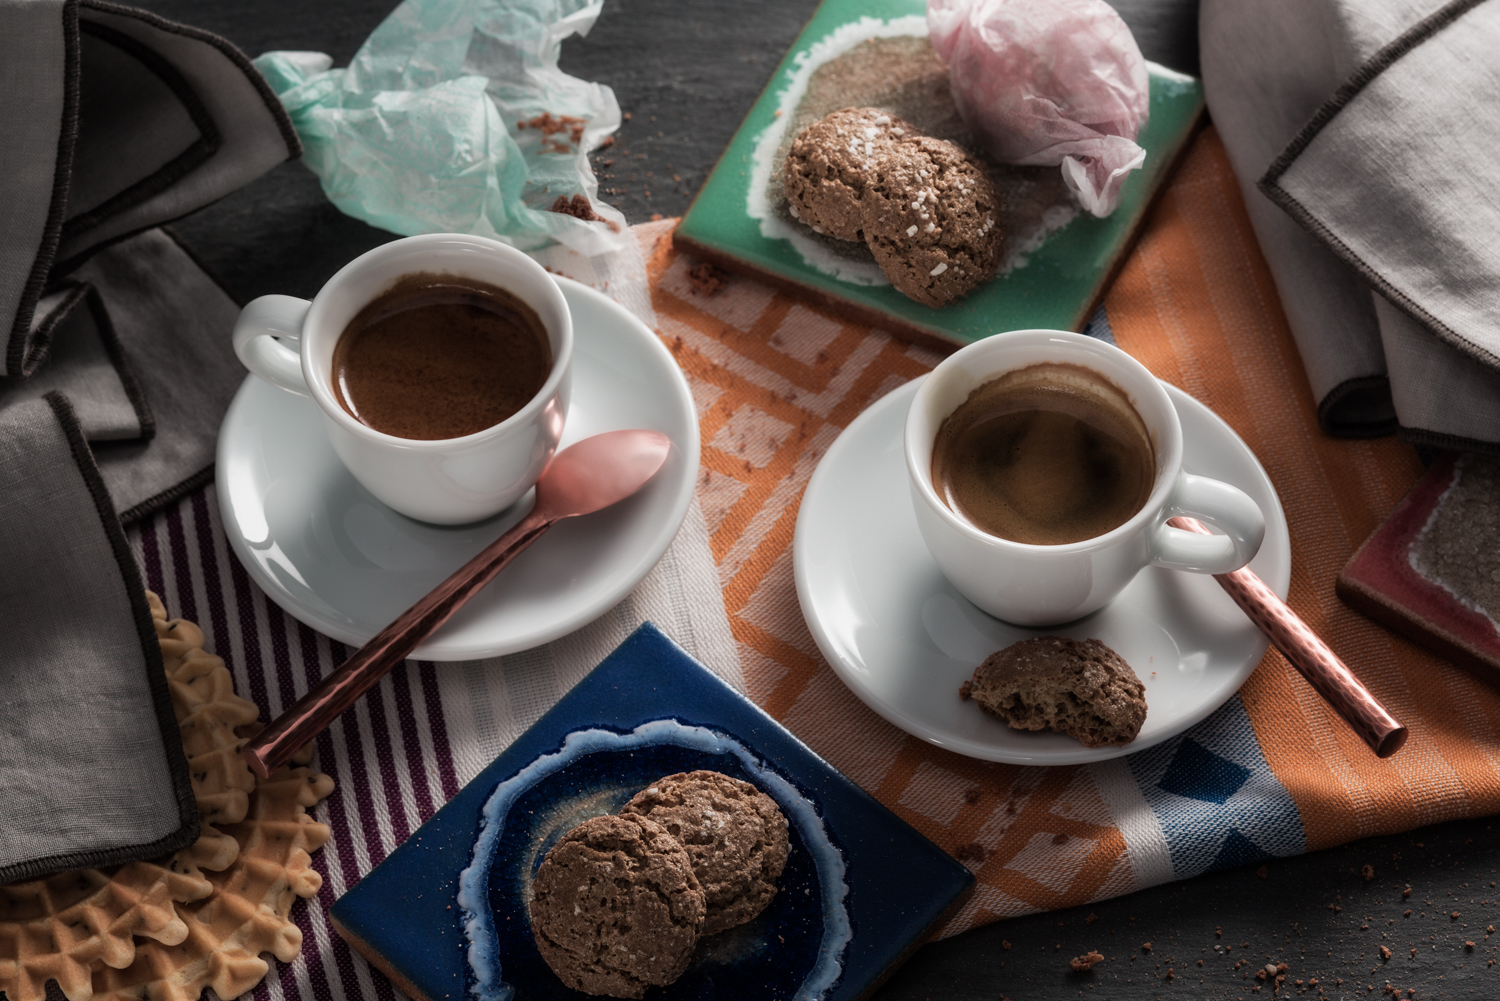 Espresso coffee cups and cookies for afternoon tea on tabletop